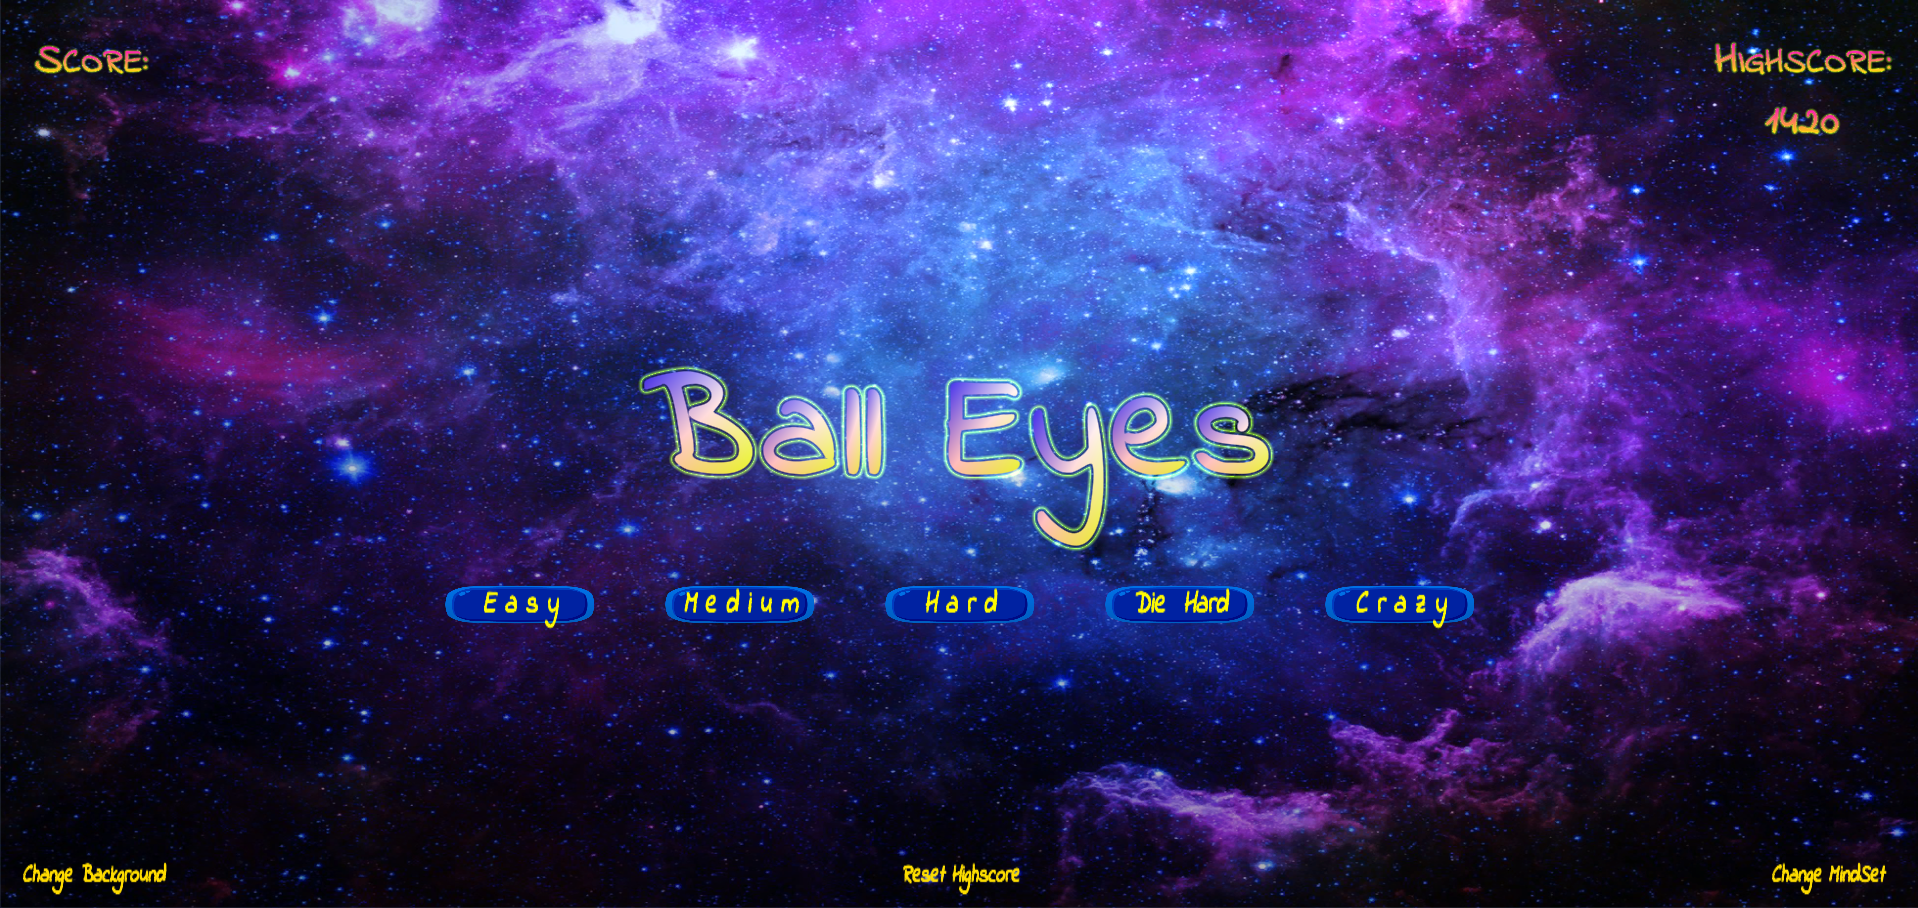 Ball Eyes - Game for Reflexes, Concentration and a bit of Strategy